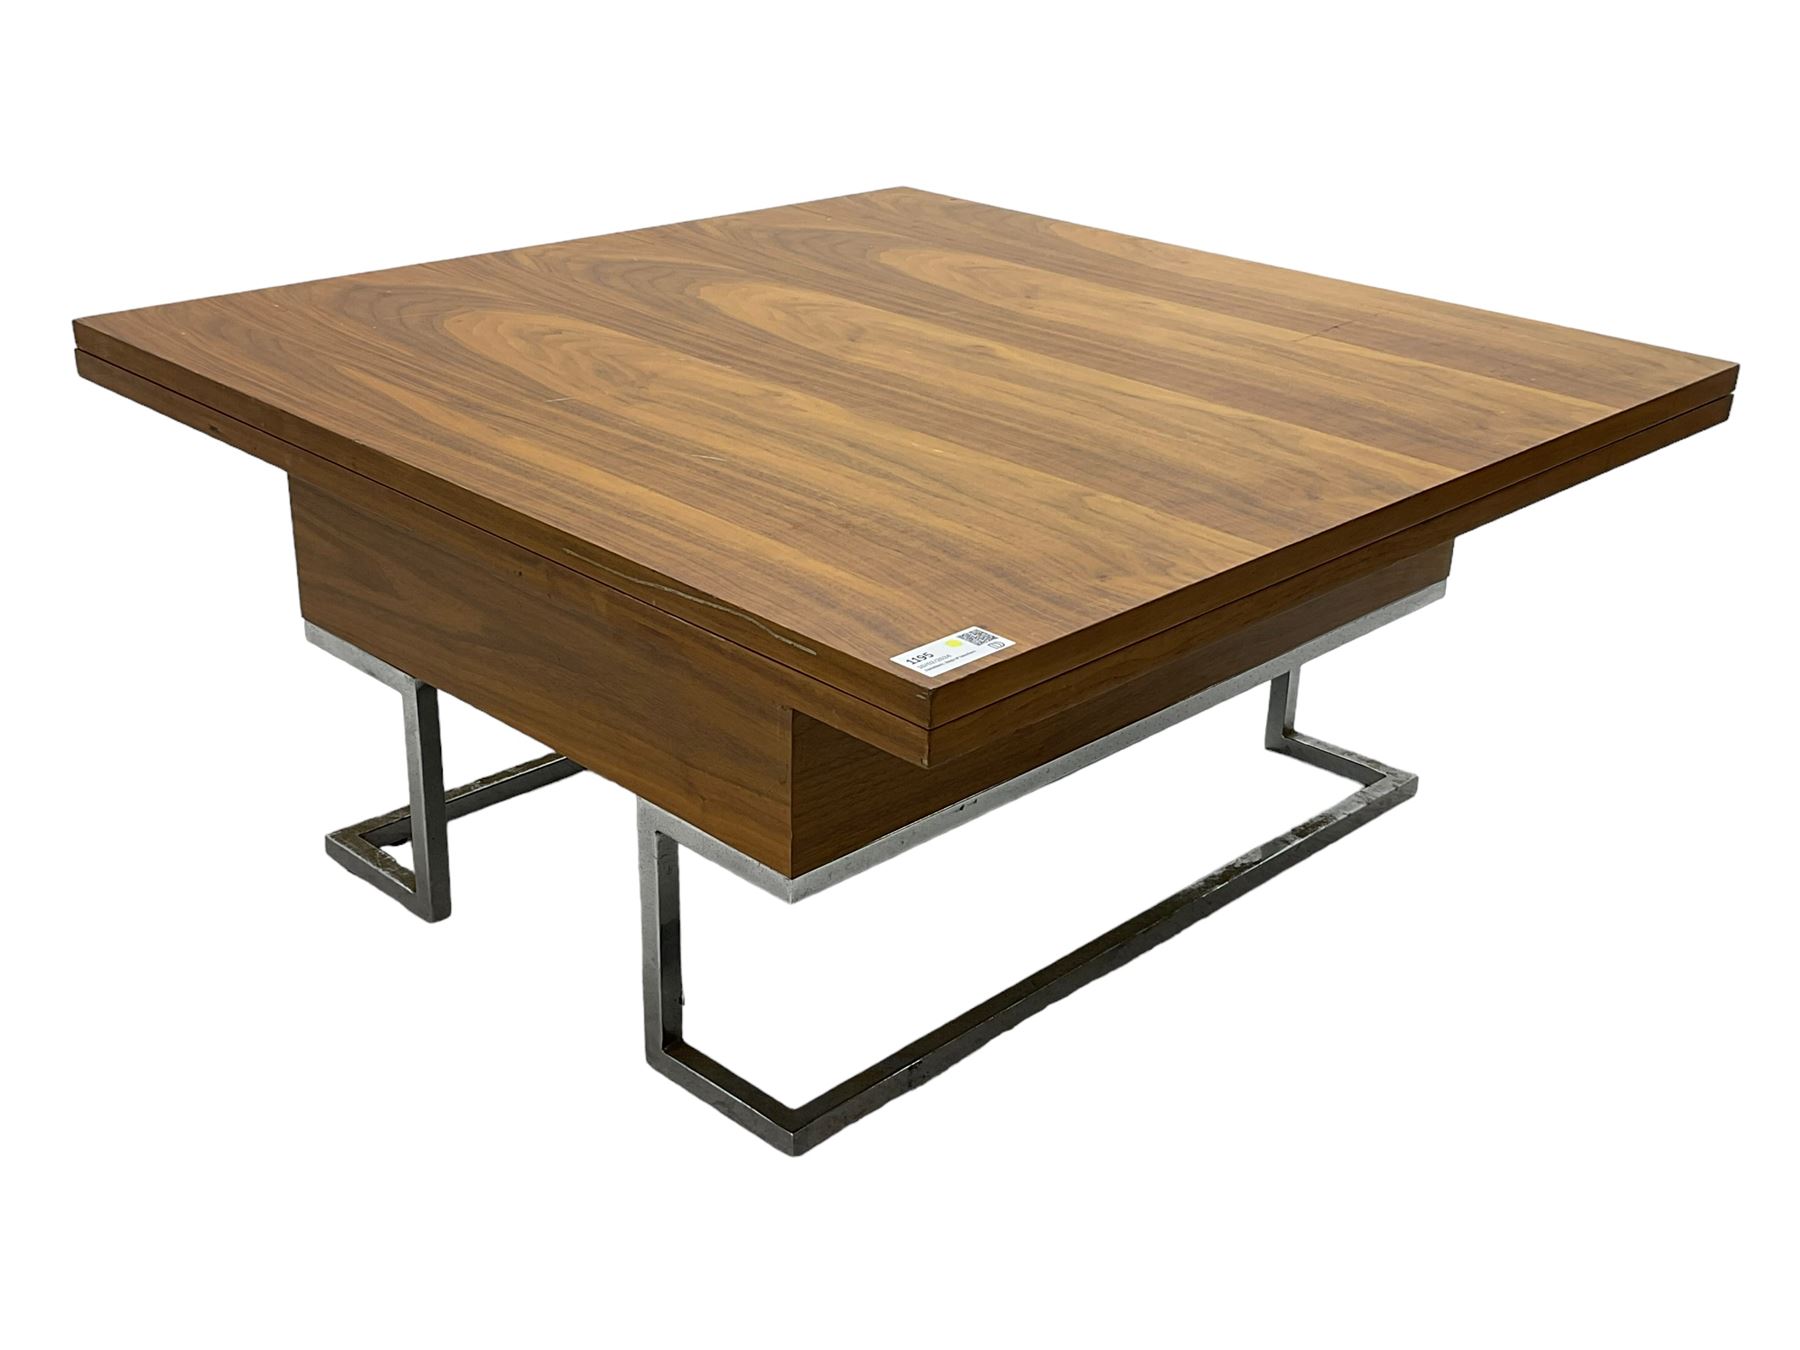 Contemporary walnut metamorphic coffee or dining table - Image 3 of 7